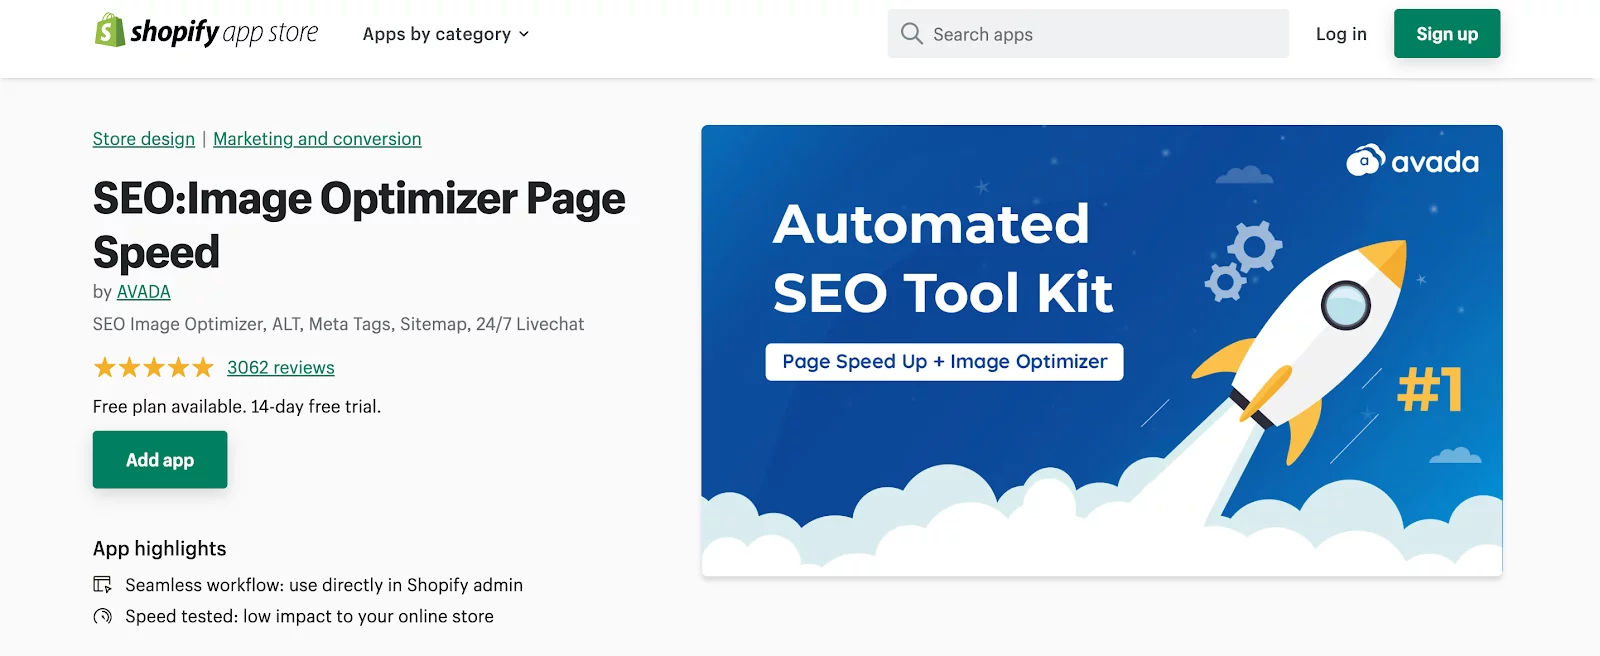 Shopify SEO Apps - Image Optimizer Page Speed by Avada